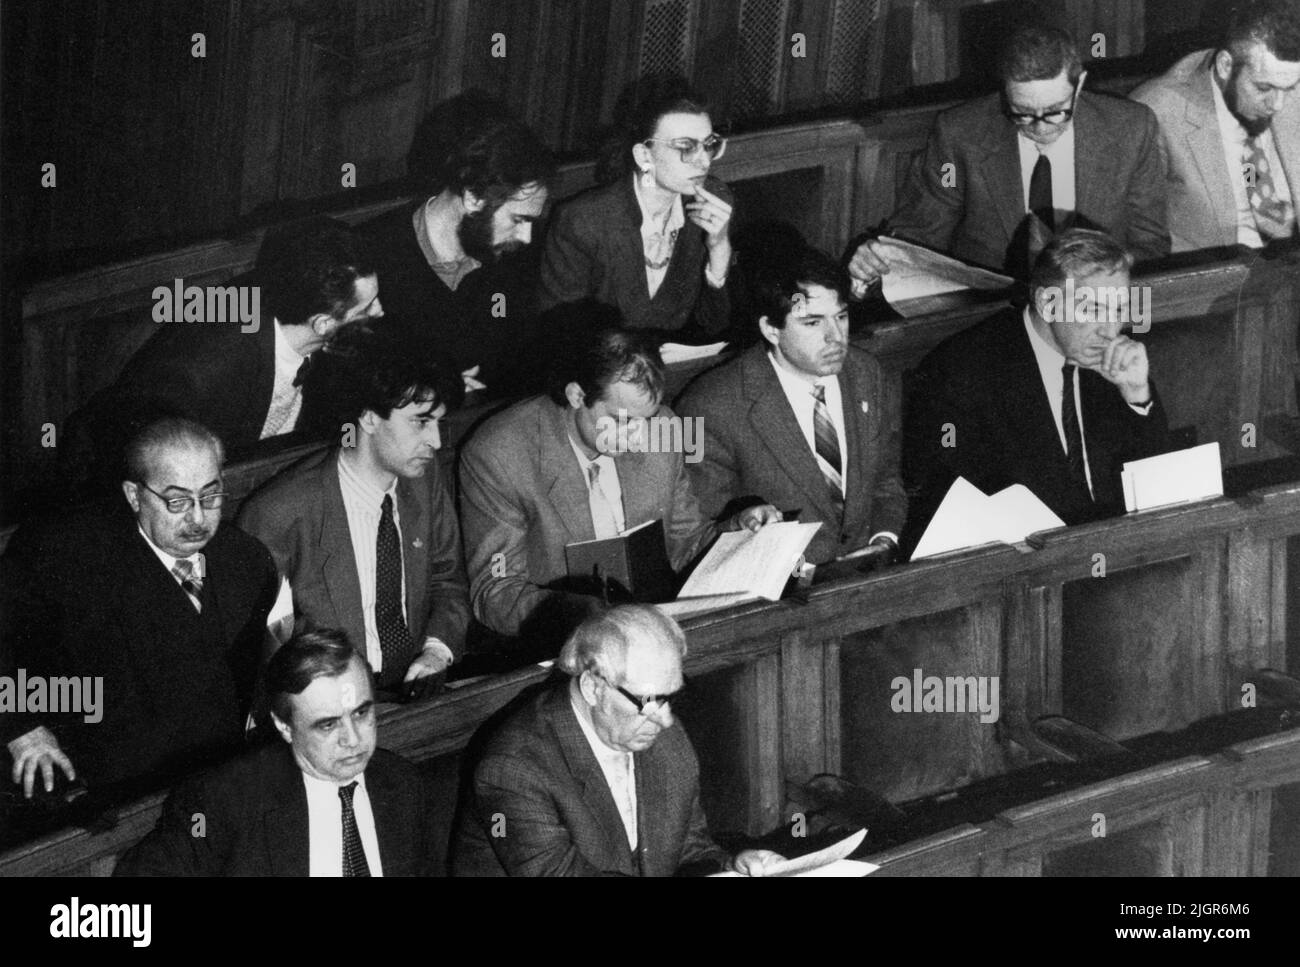 Members of the Romanian Parliament during session in 1990, the first legislature after the fall of the communist regime. Stock Photo